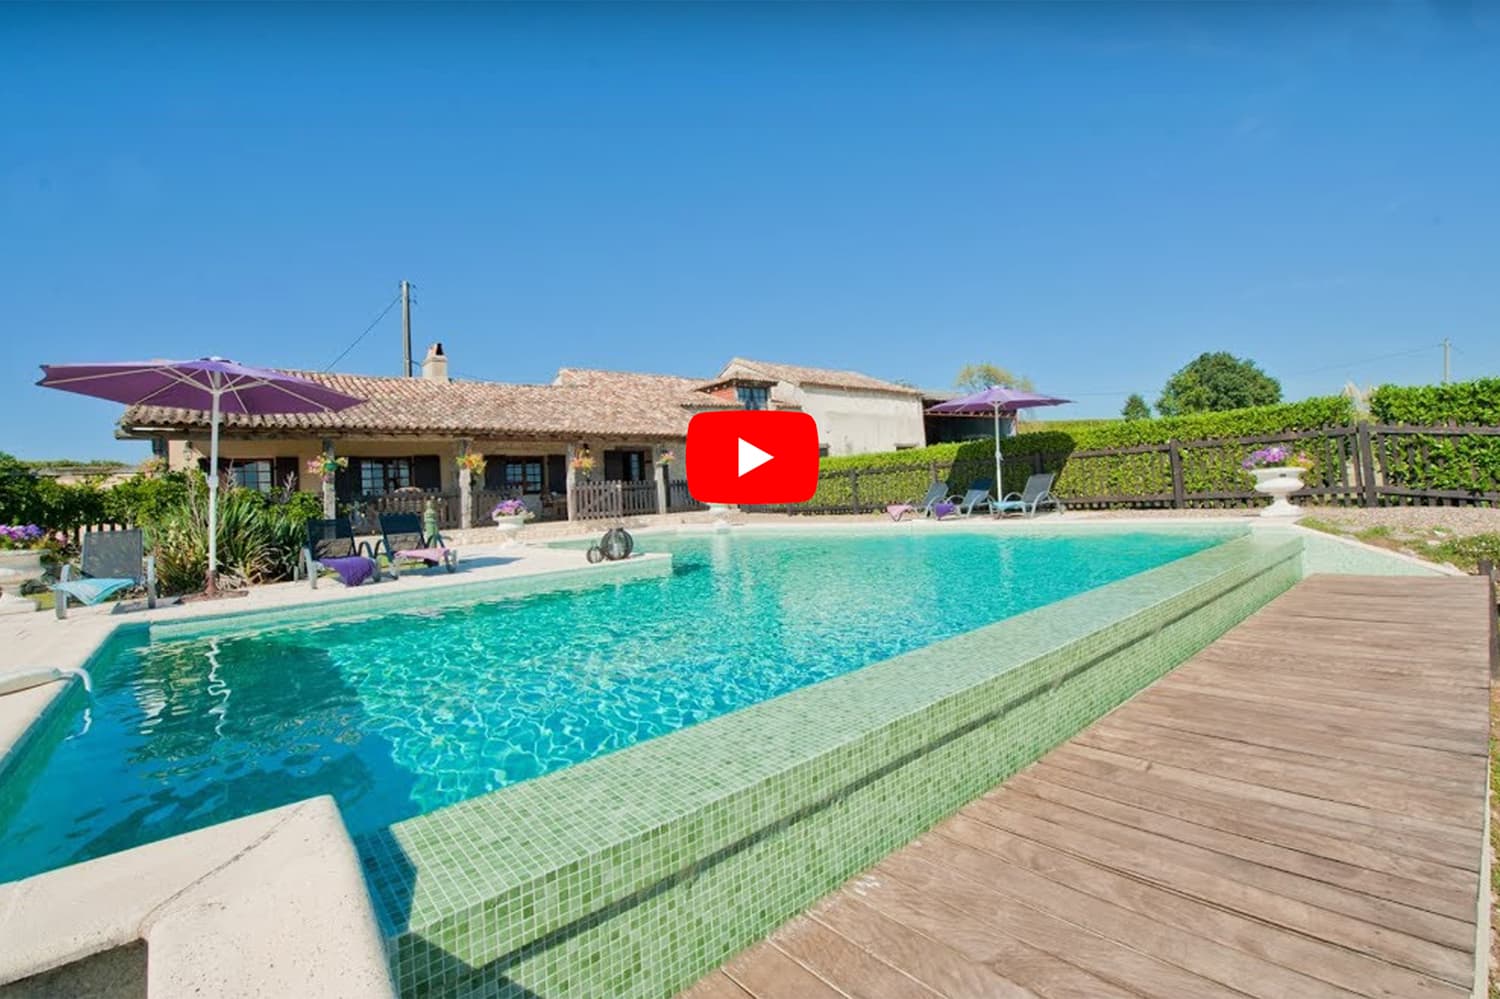 Holiday accommodation video in Saussignac